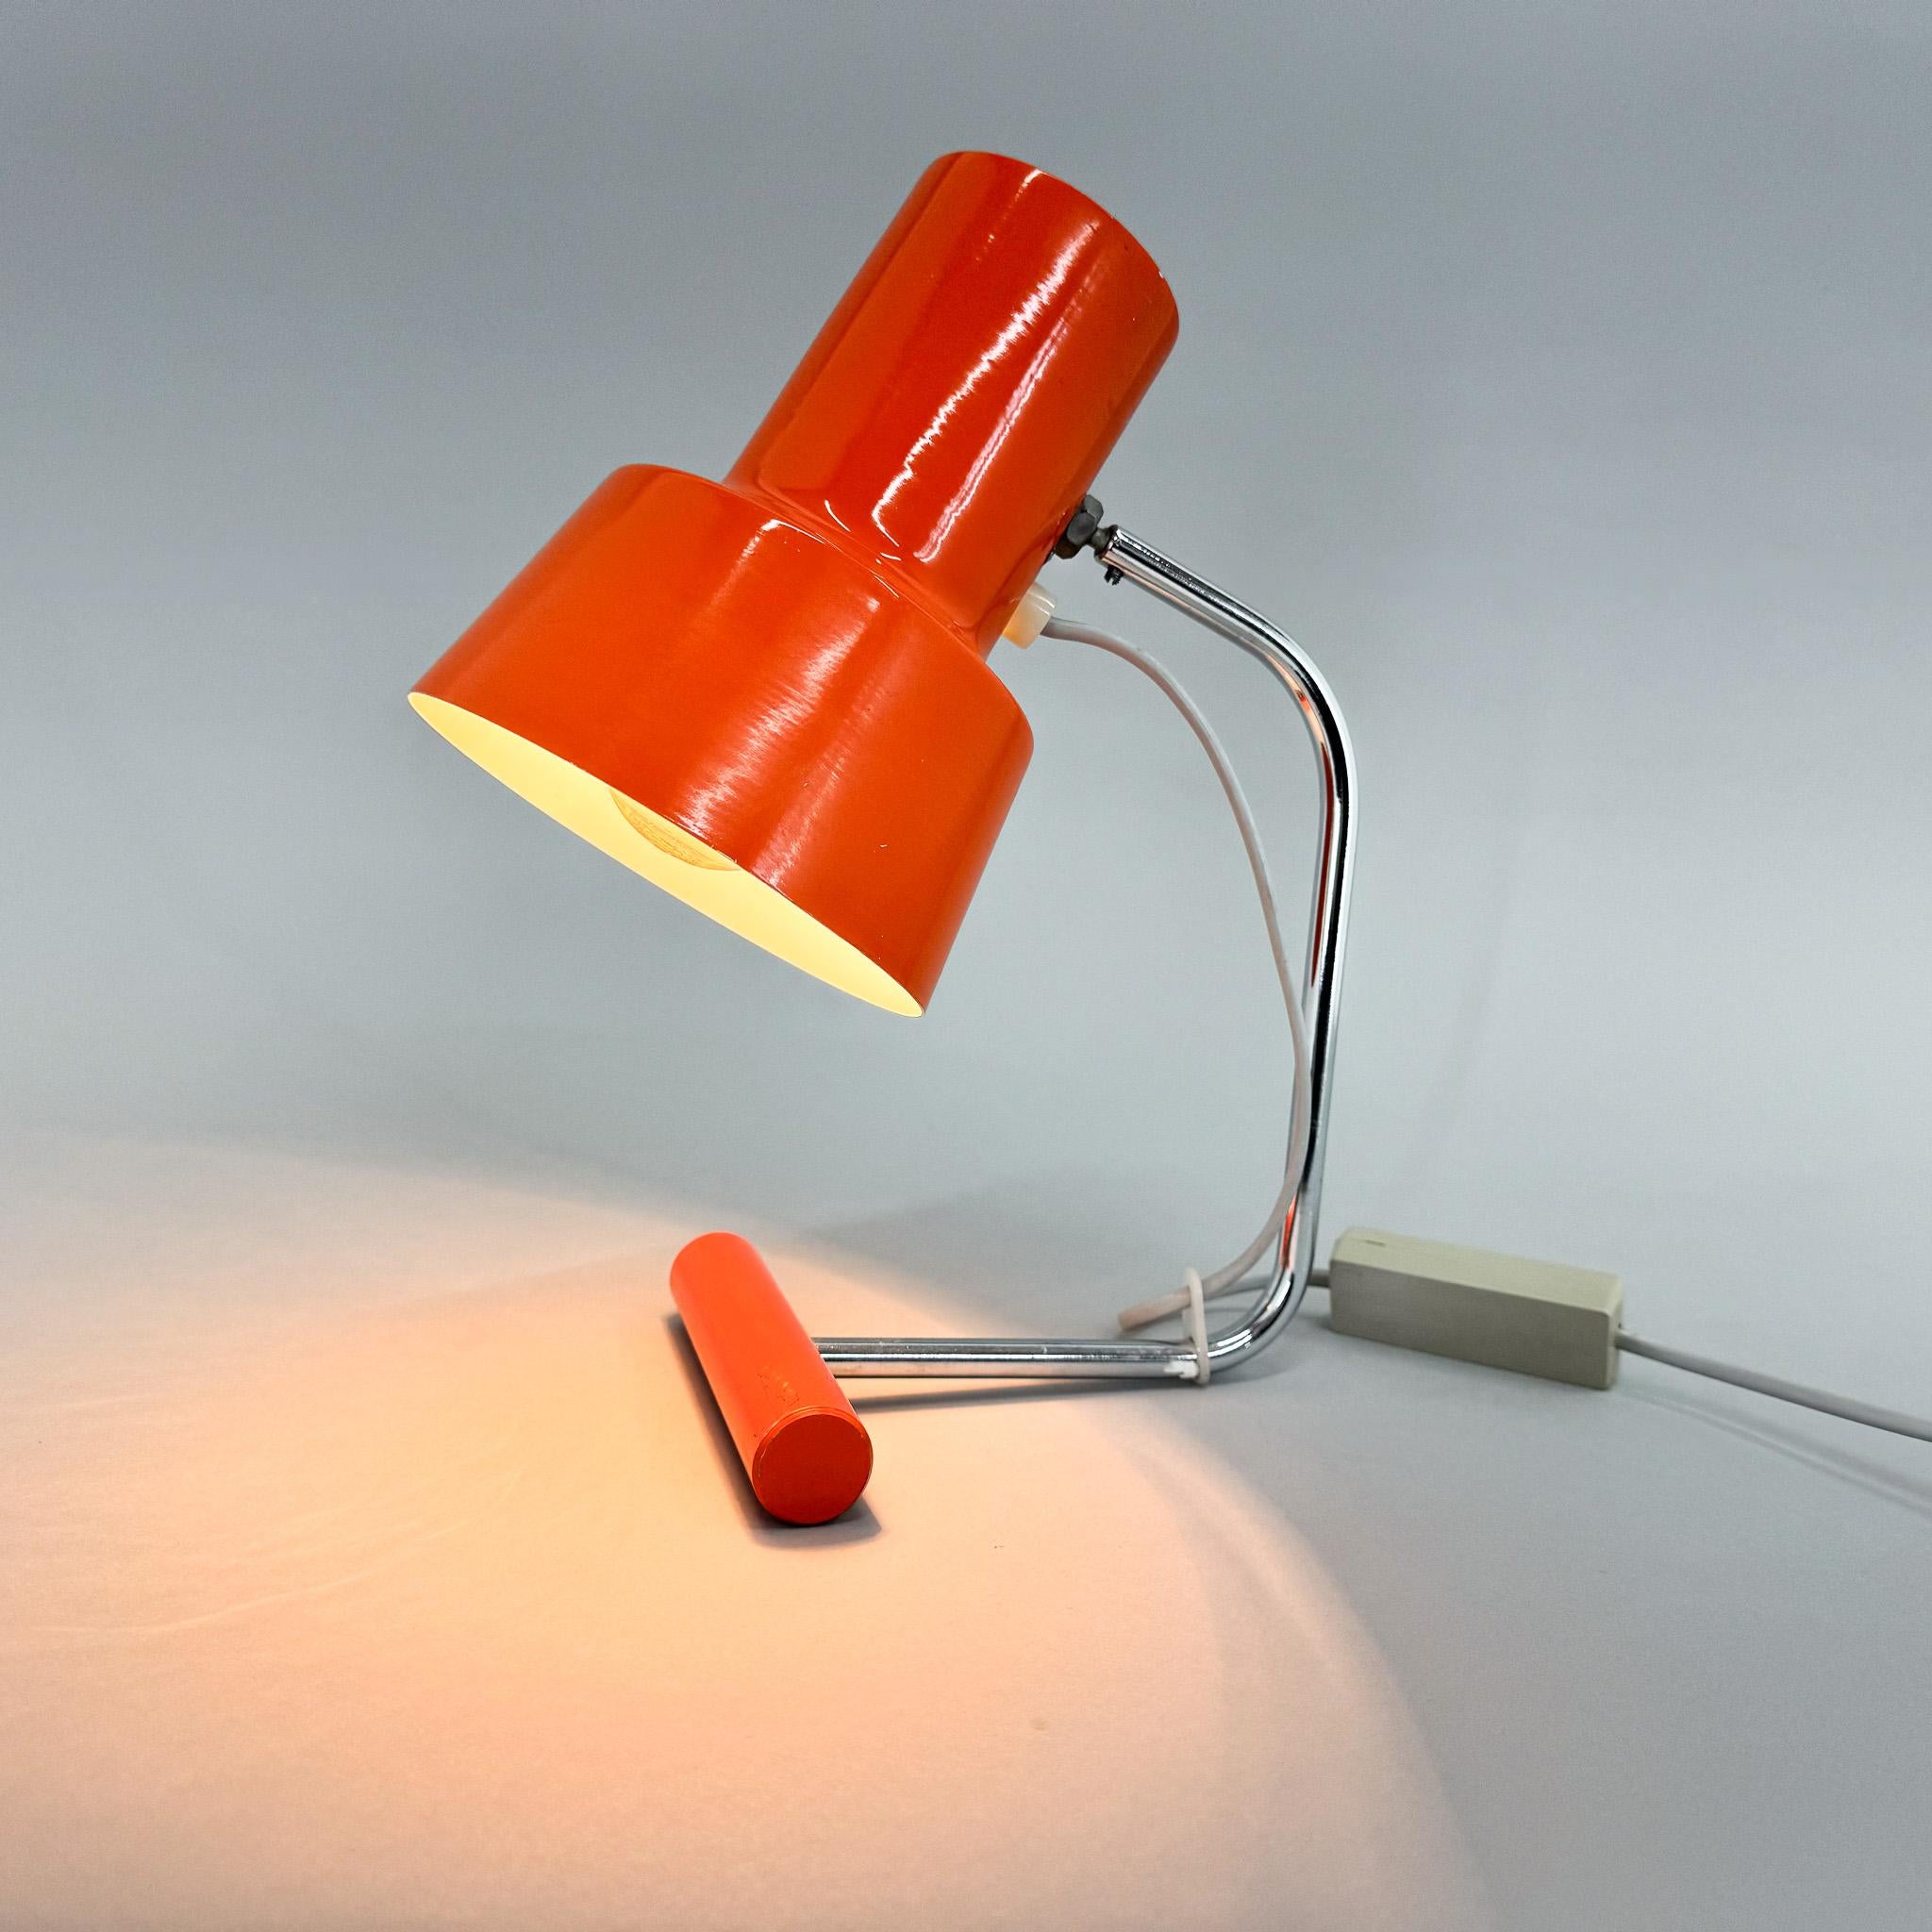 Vintage table lamp designed by Josef Hůrka for Napako in former Czechoslovakia in the 1960's. US adapter included.
Bulb: 1x E26-E27.